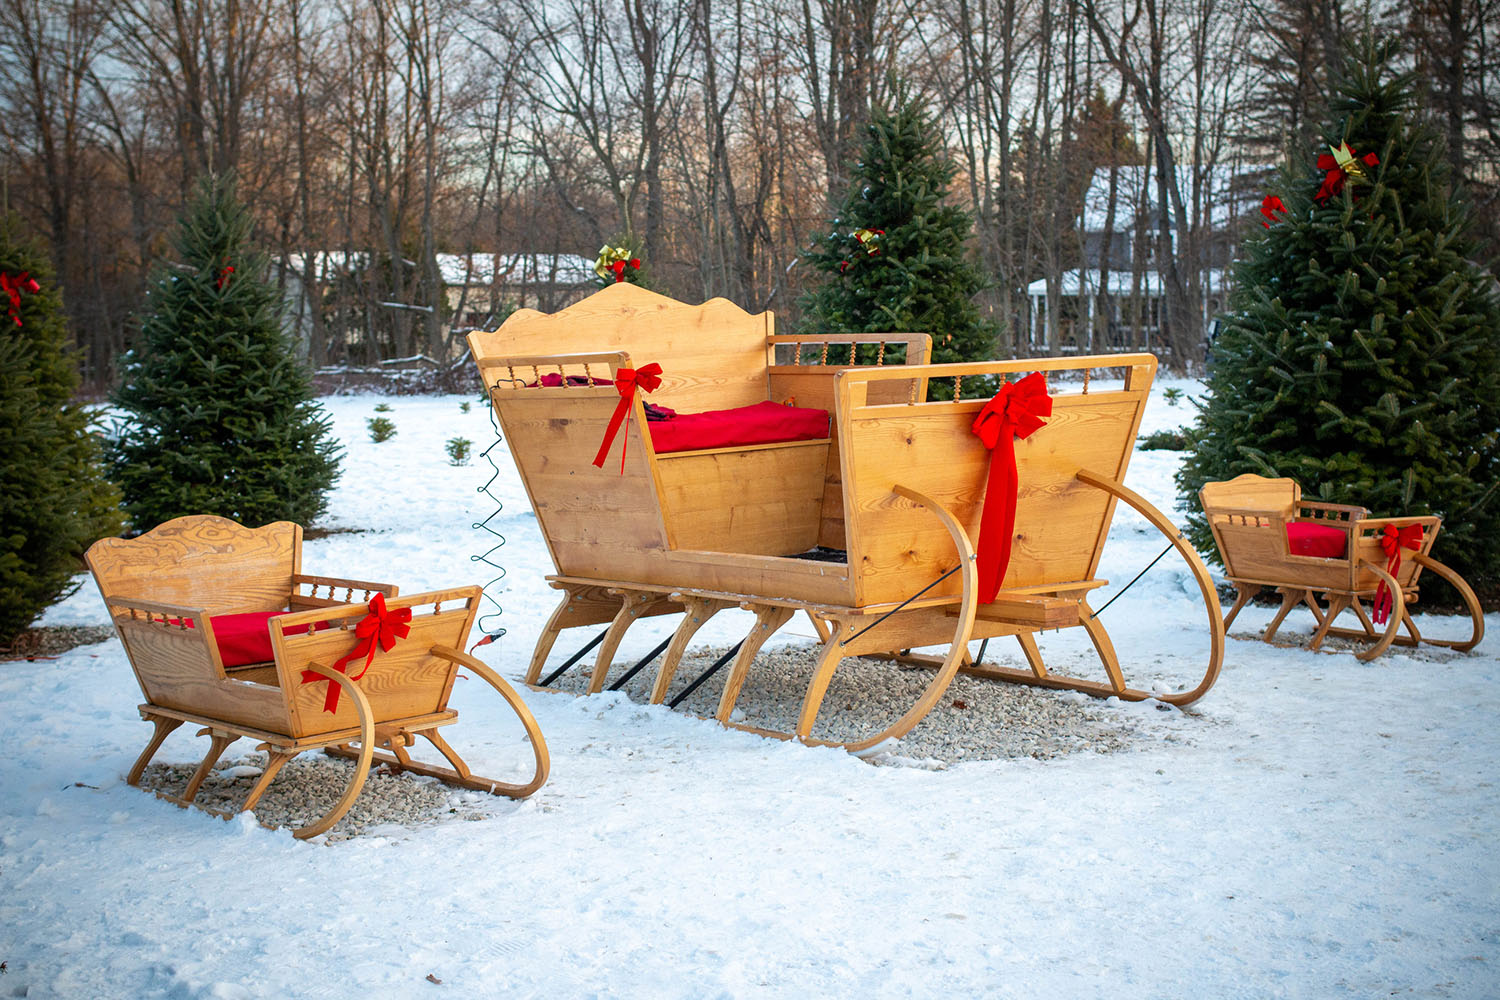 sleighs at Trees for Less in Mequon